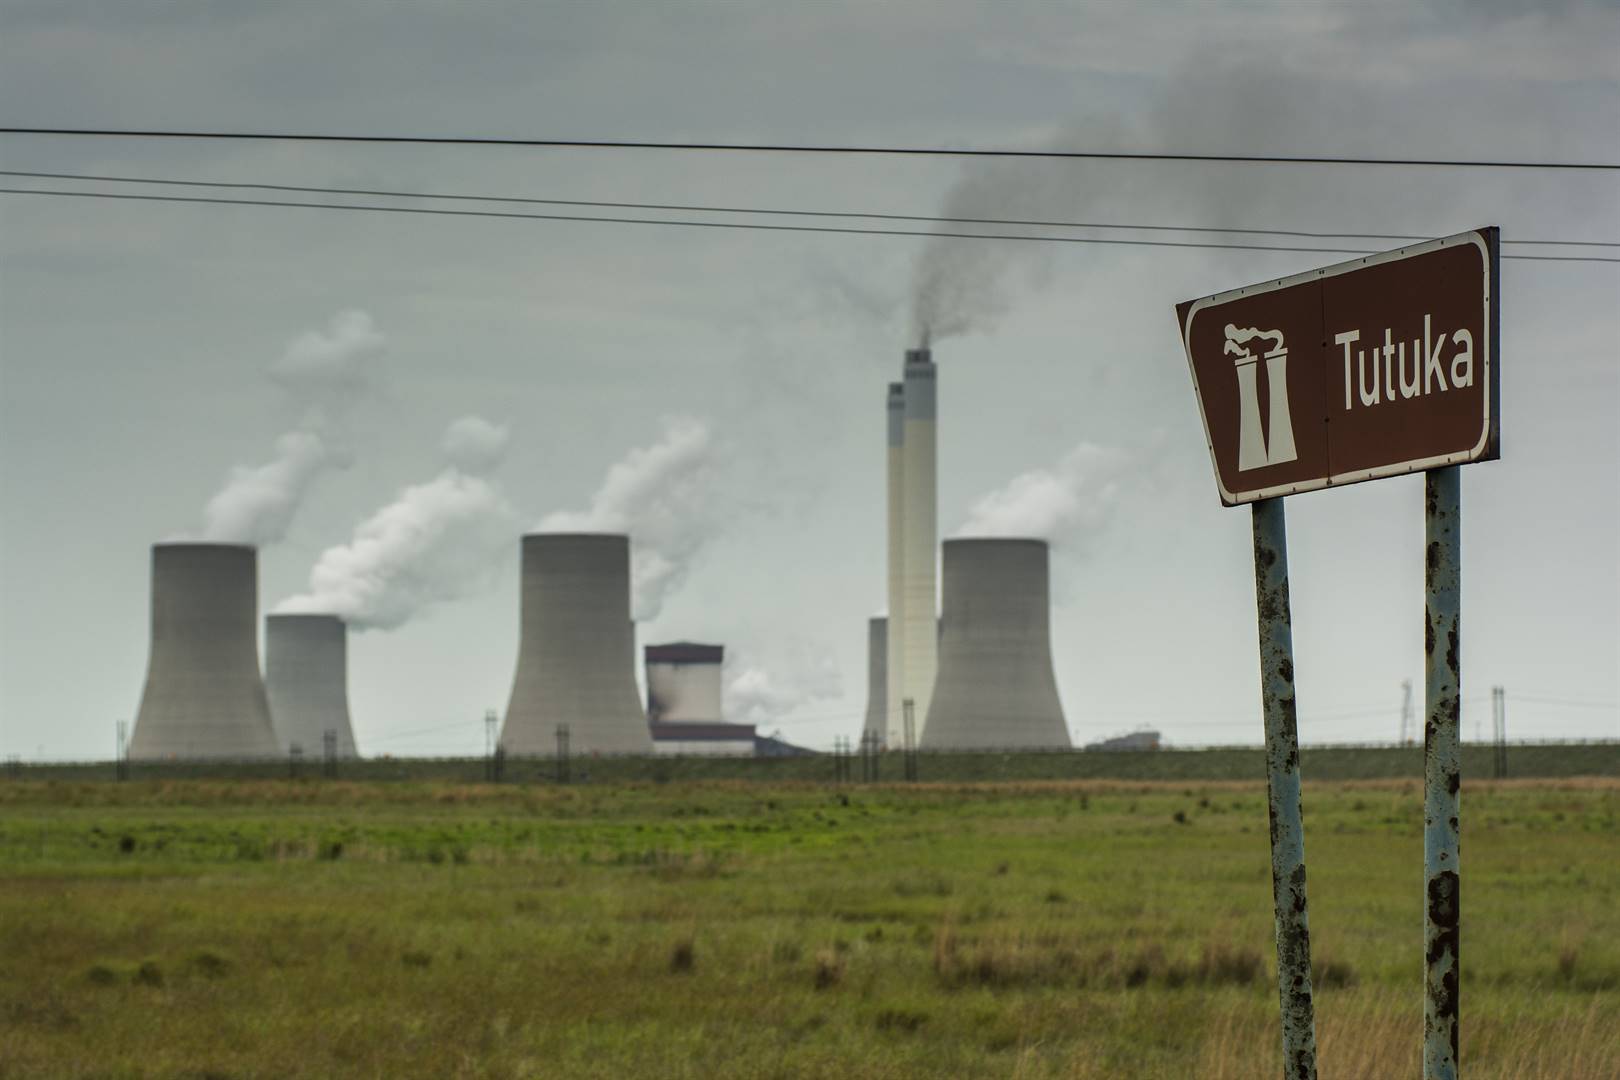 The Tutuka coal-fired power station in Mpumalanga. Photo: Getty